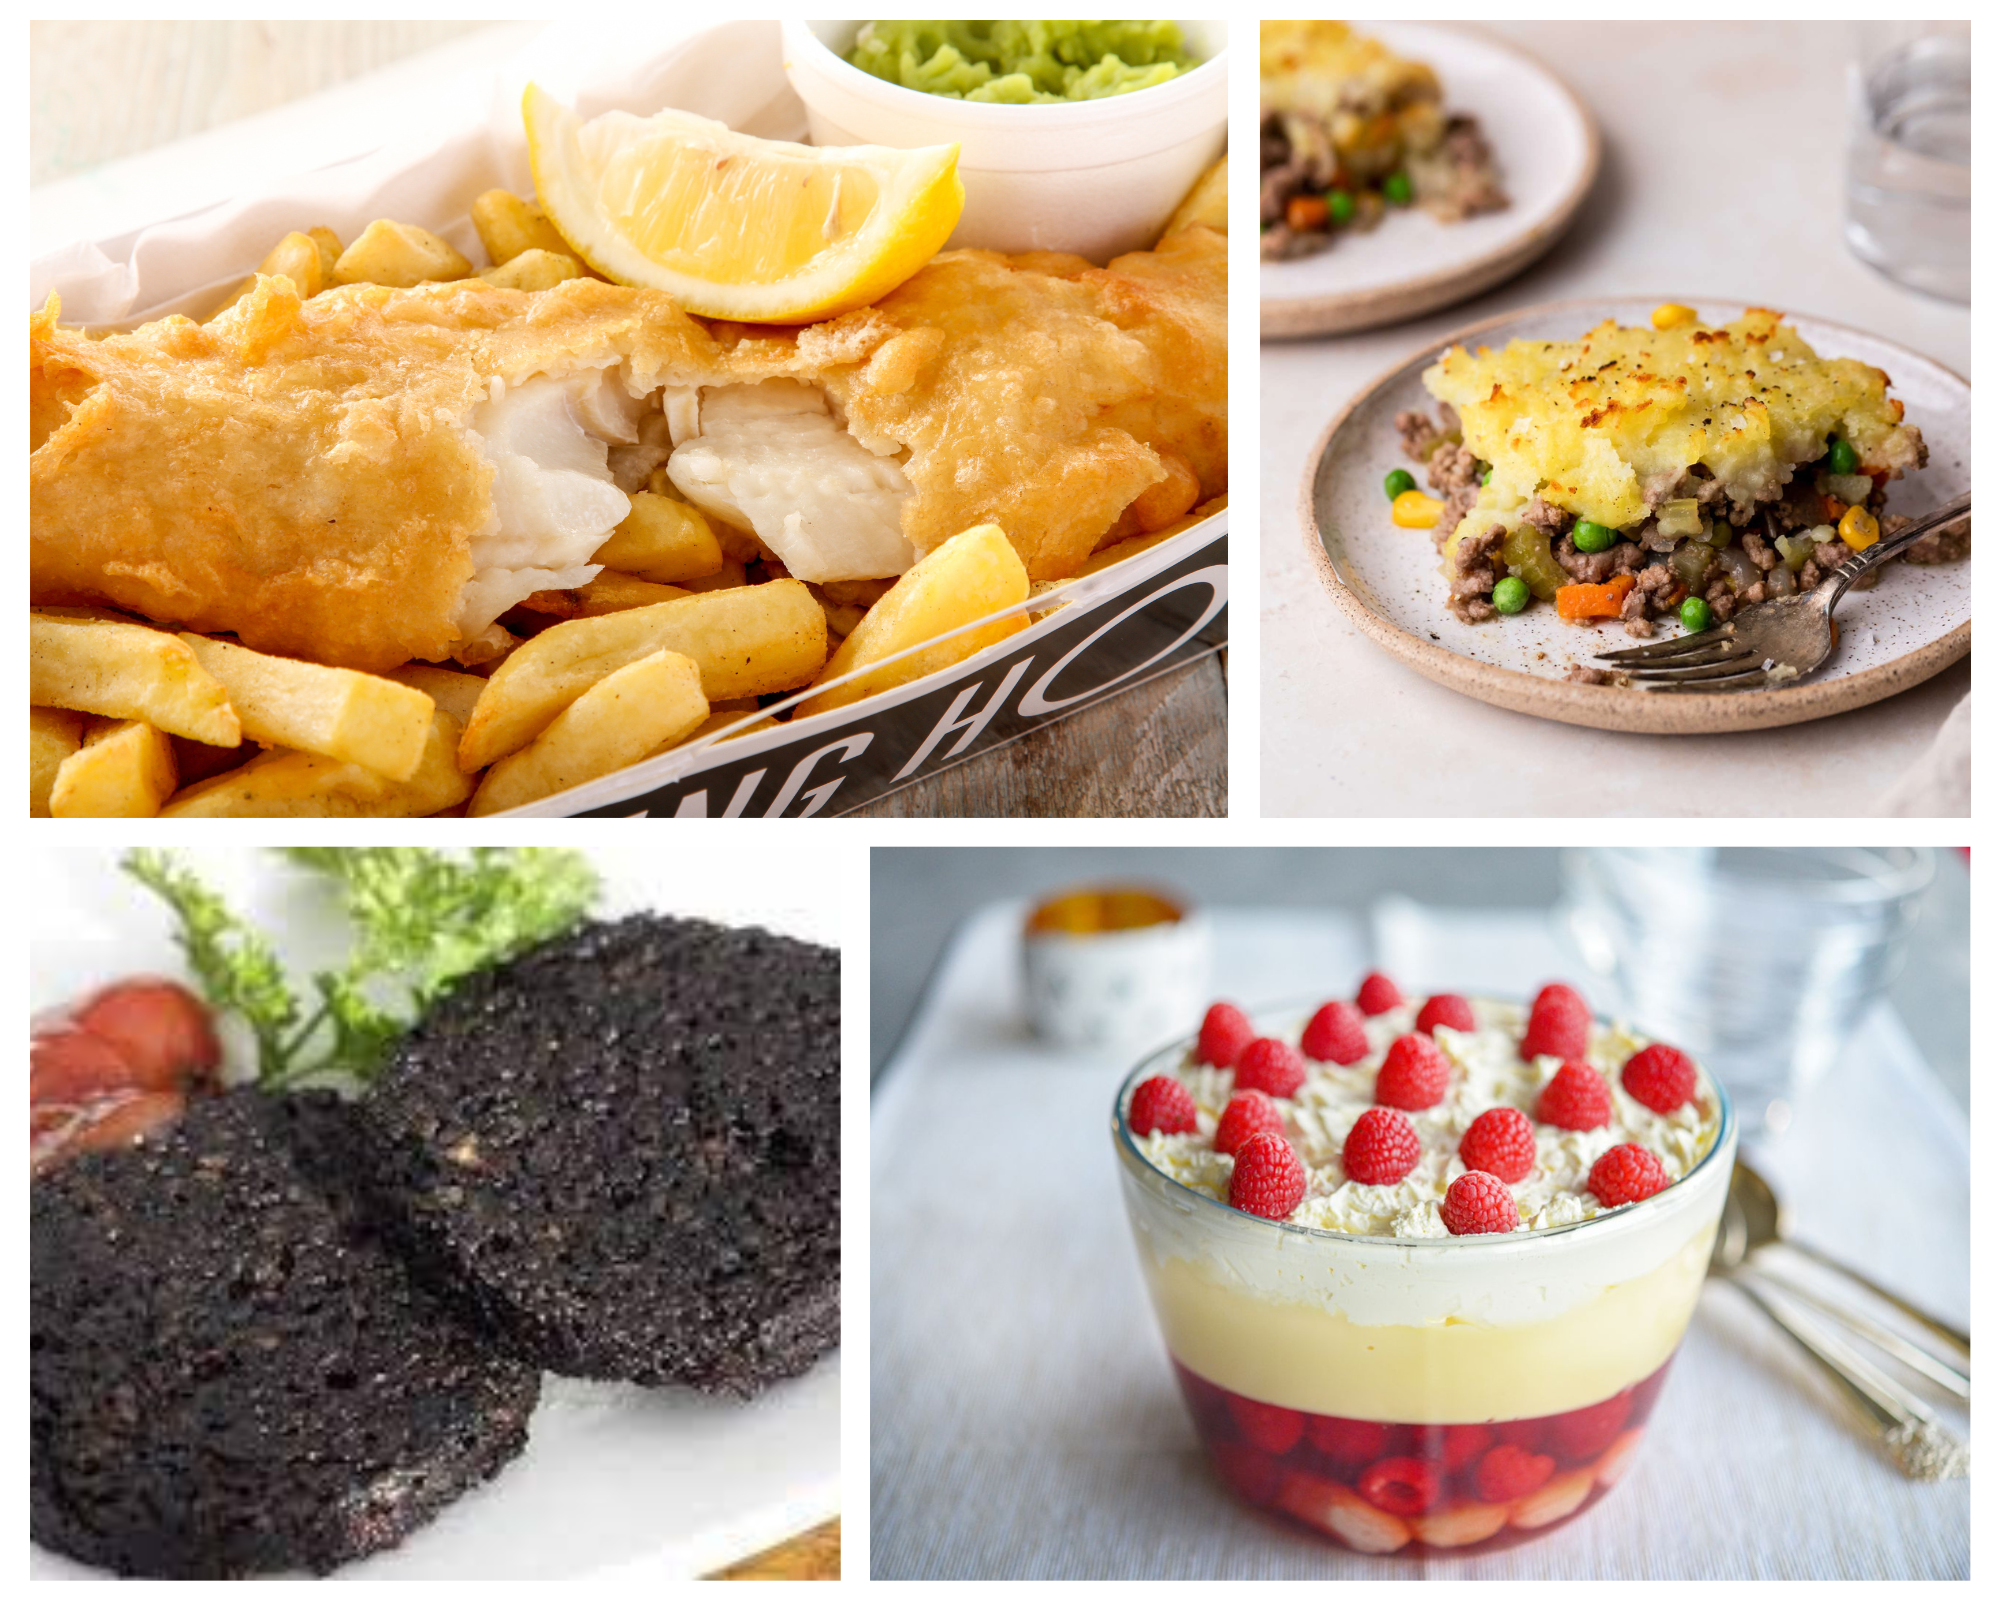 Fish and Chips, shepherd’s, Black pudding, English trifle traditional food Great Britain England